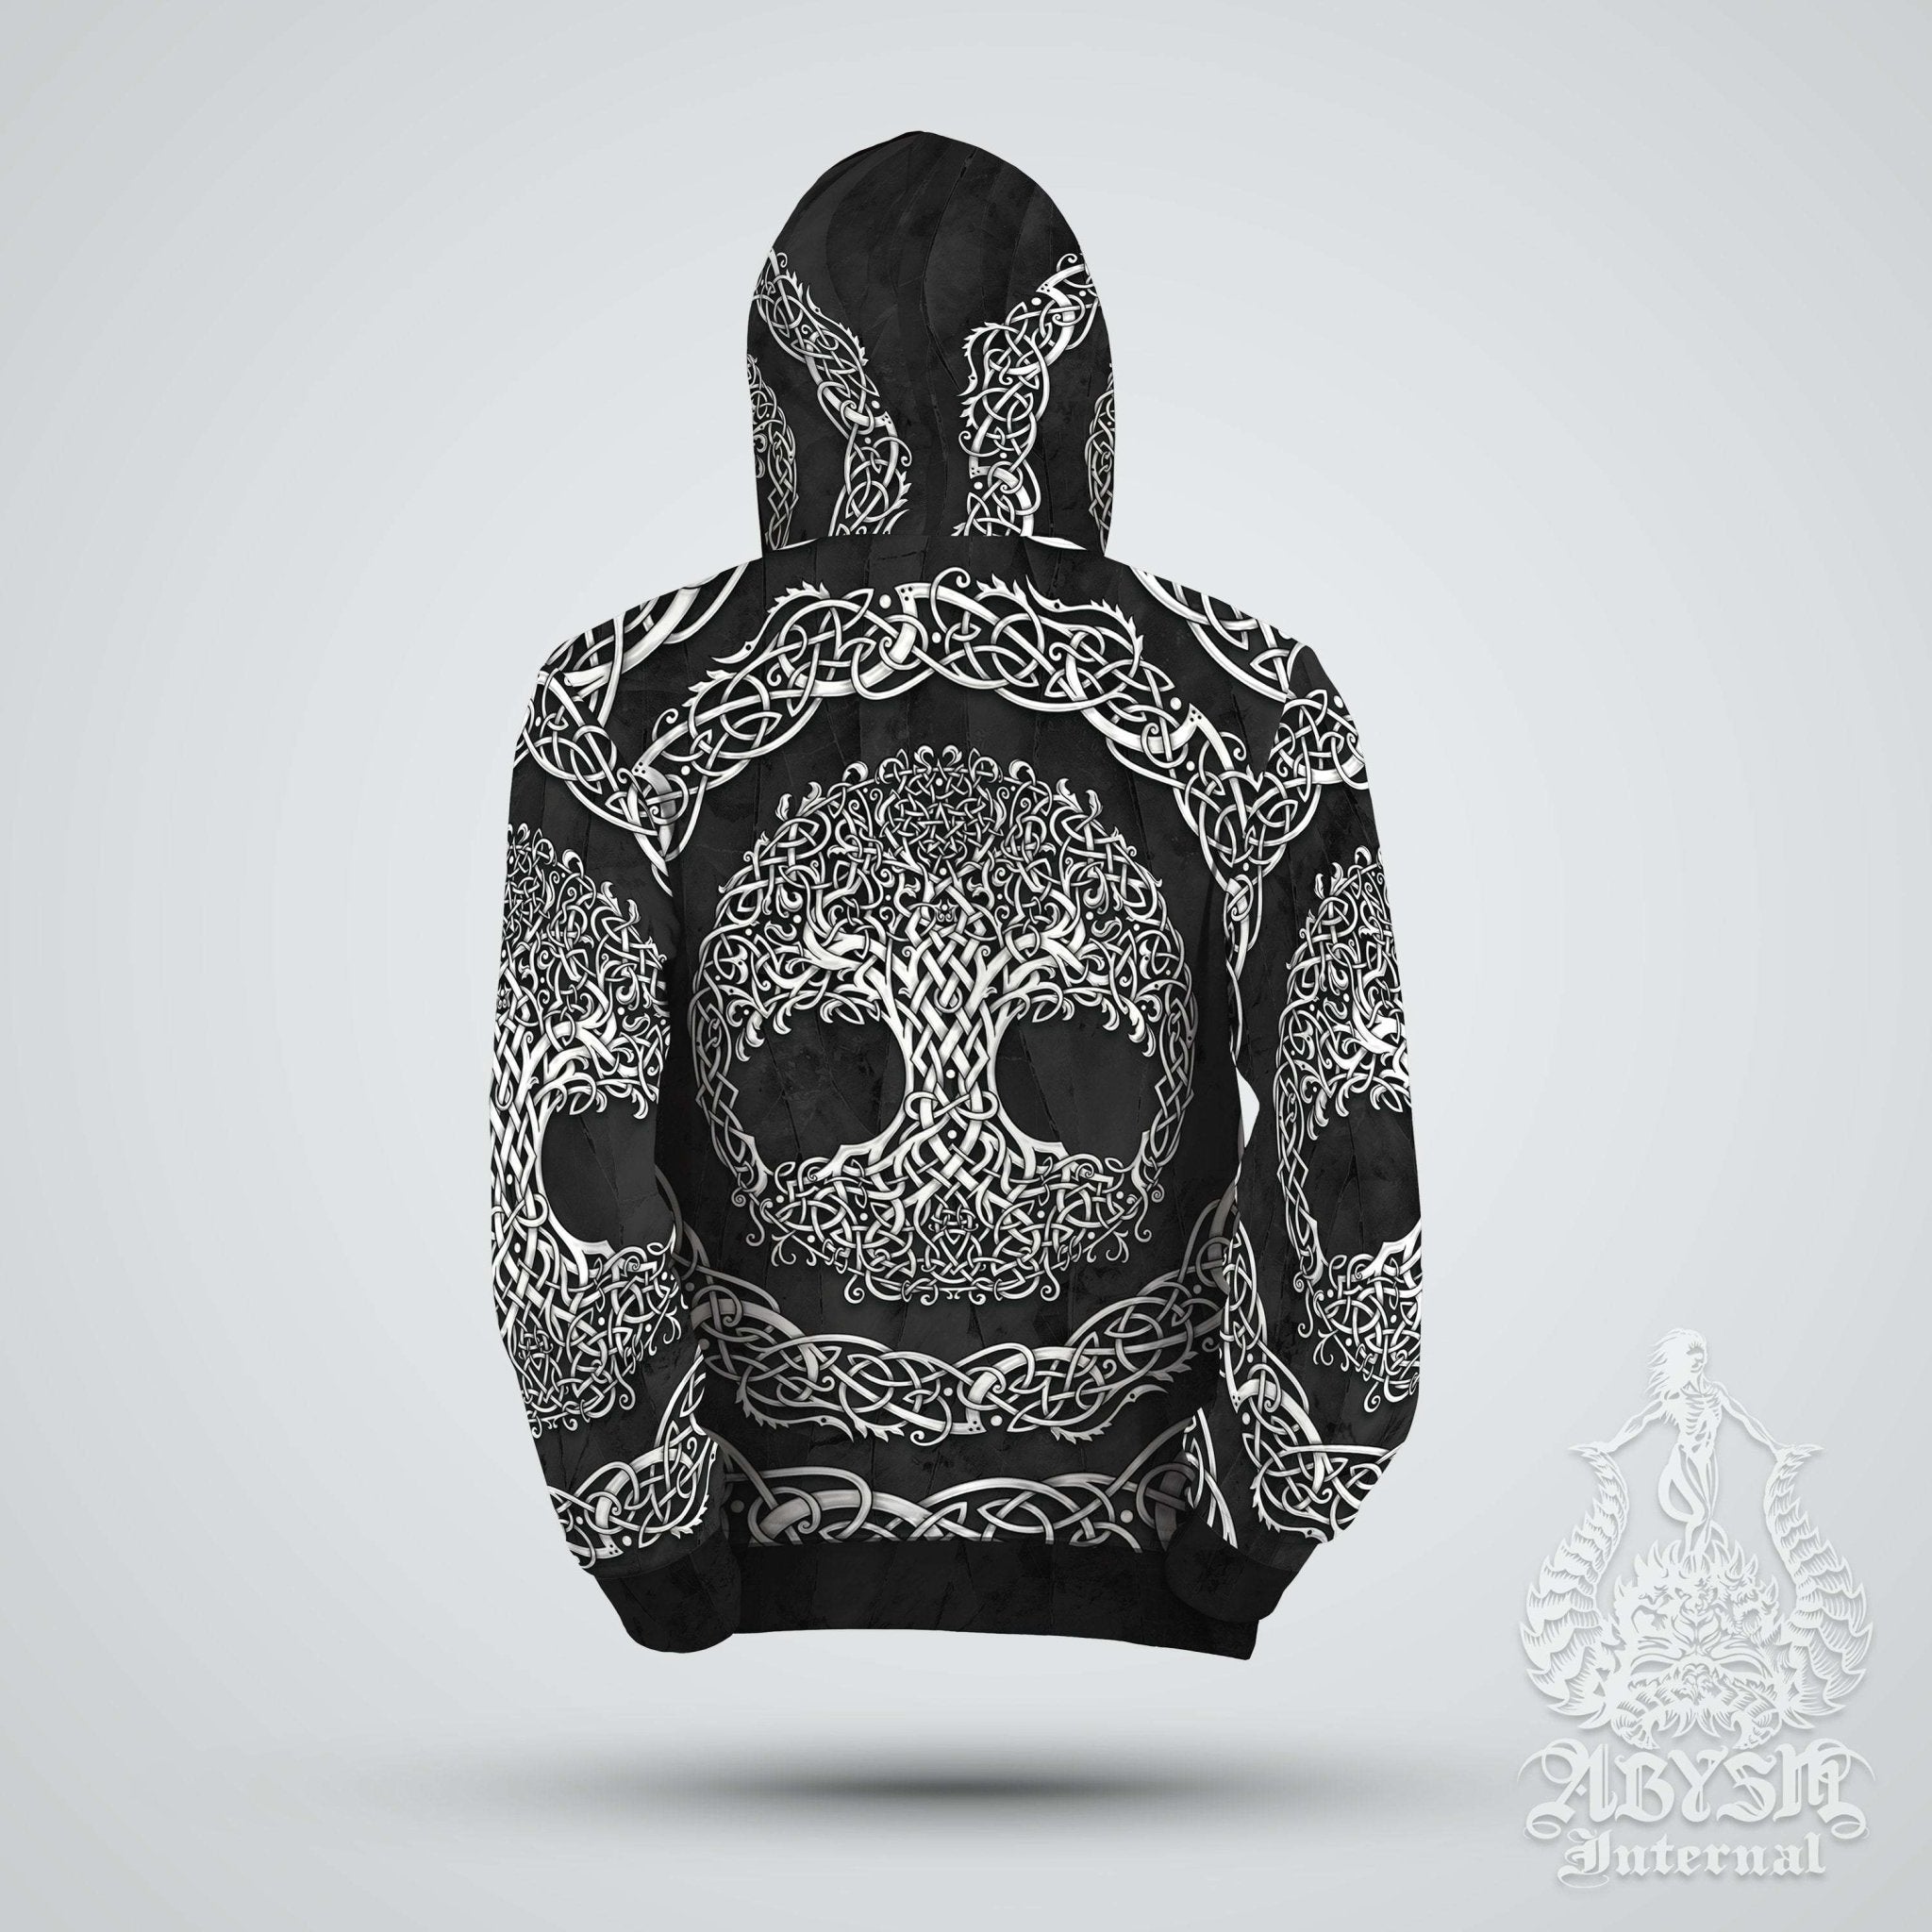 Tree of Life Hoodie, Boho Outfit, Indie Sweater, Celtic Witchy Streetwear, Alternative Clothing, Unisex - White Black - Abysm Internal